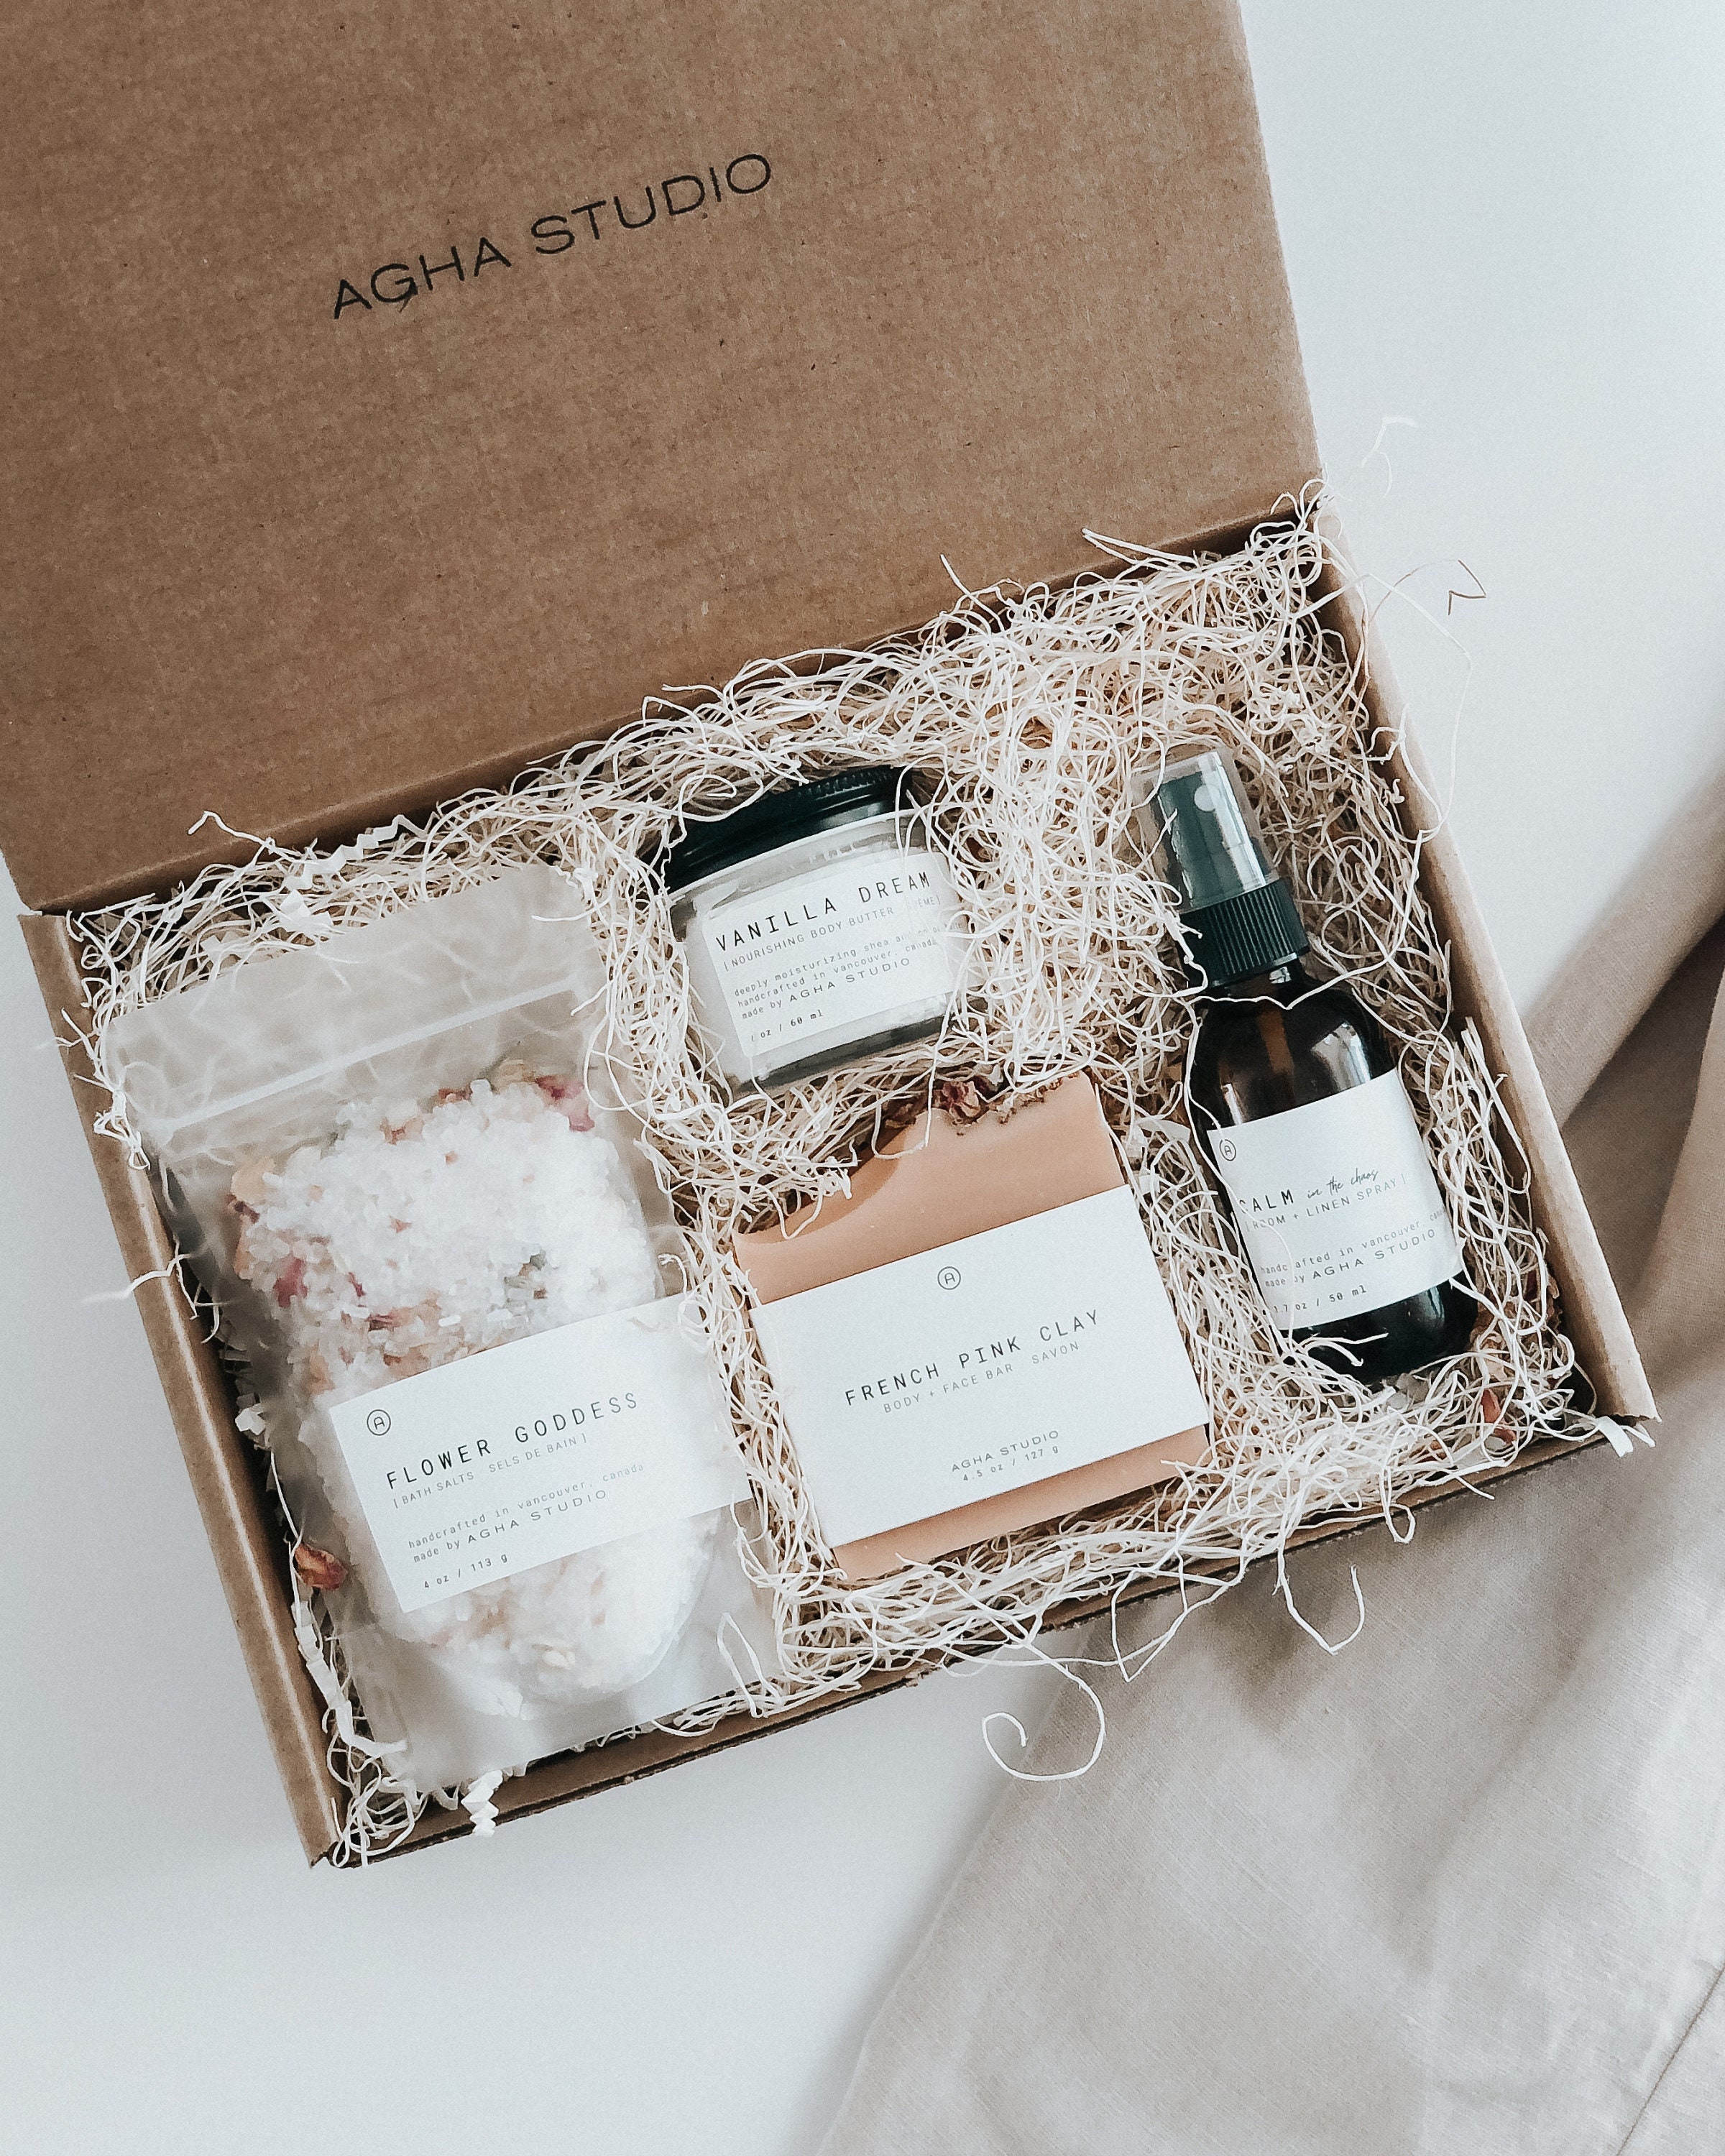 Spa Day Self Care Gift Box Luxury Spa Gift Box, Care Package for